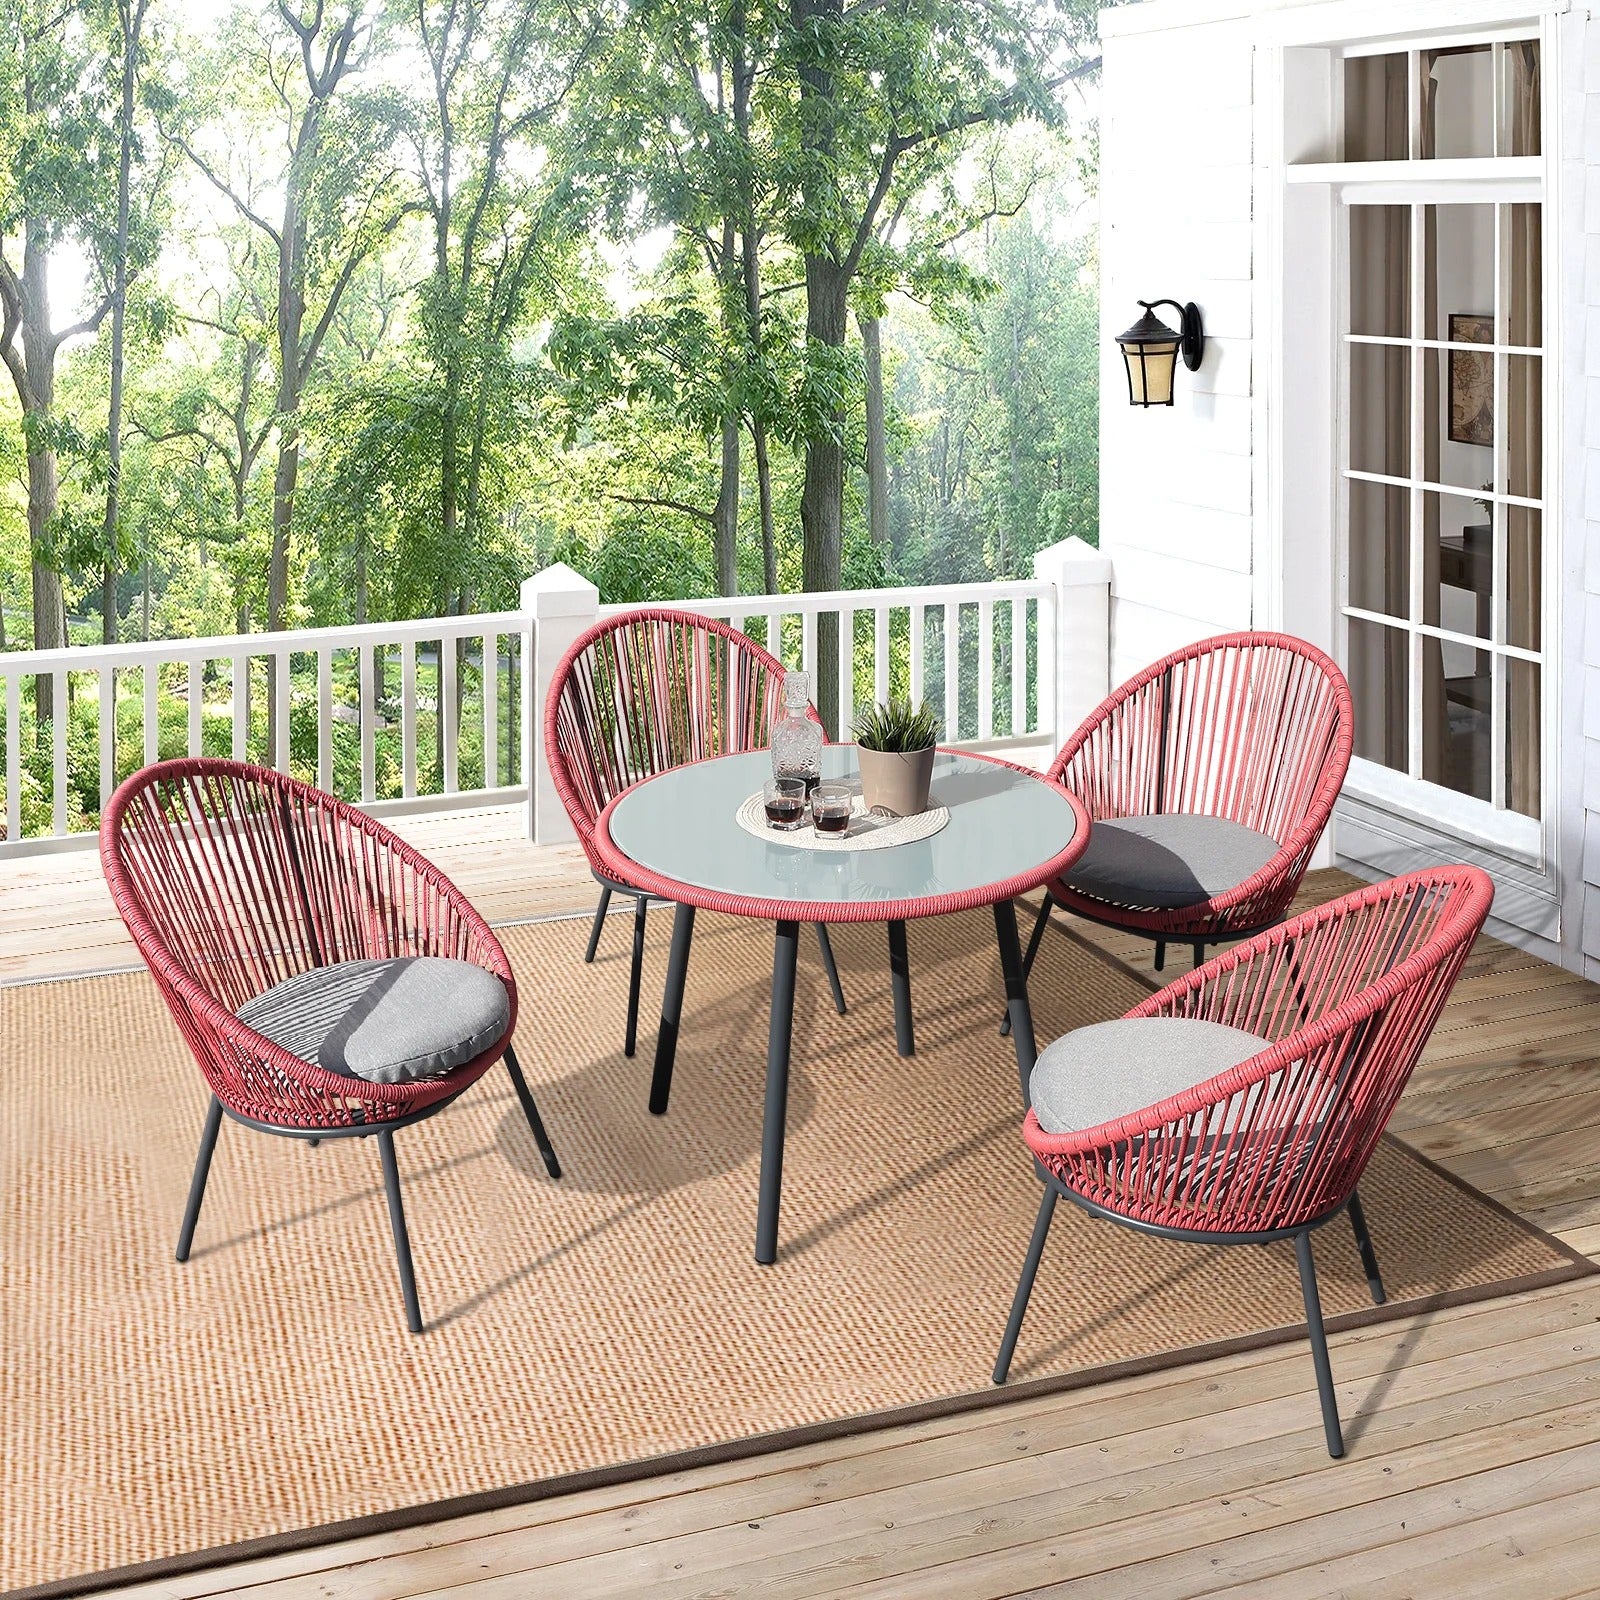 Swoosh Patio Seating Set 4 Chairs and 1 Table Set (Light Red)